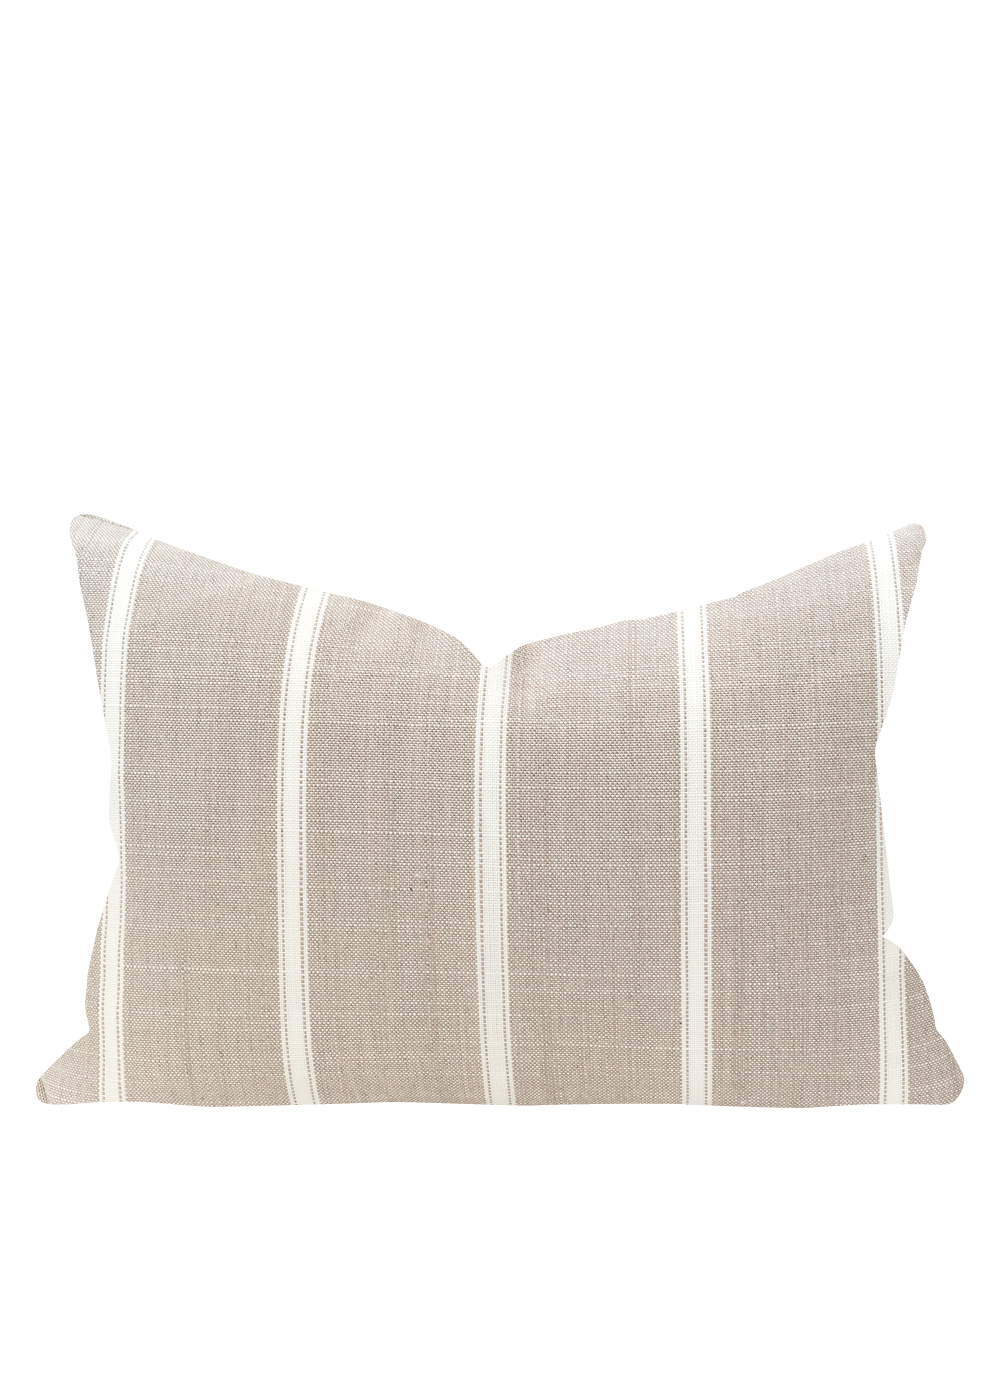 Sydney Outdoor Pillow Cover, Sand